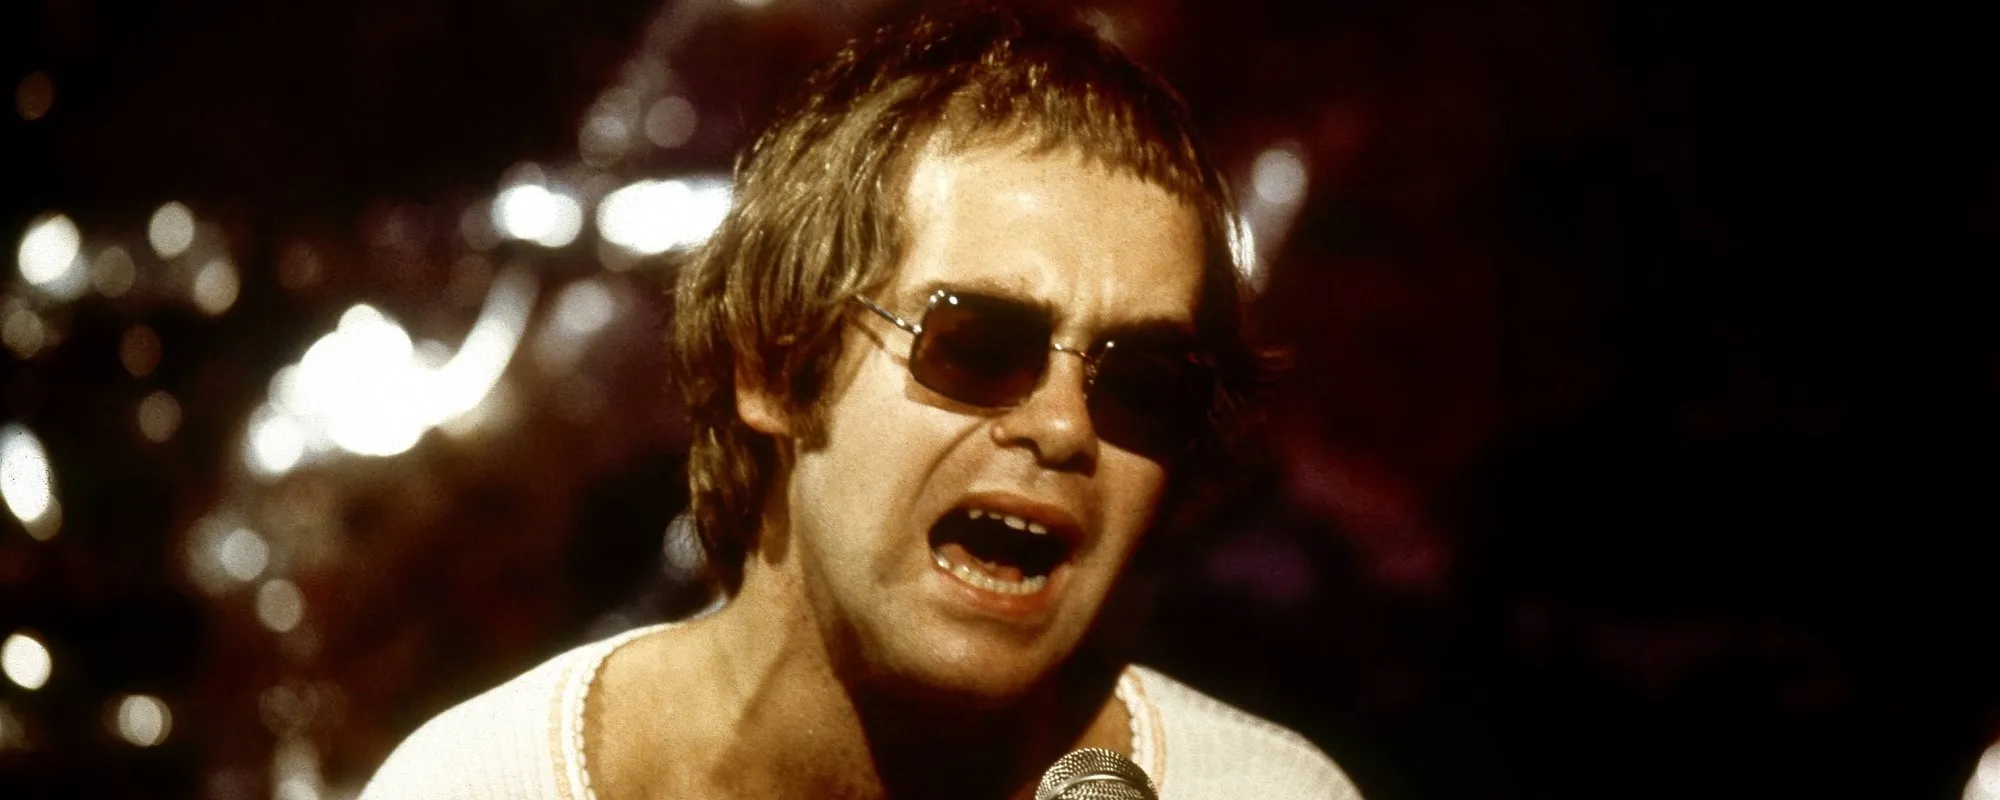 Check Out 5 Great Americana-Influenced Elton John Songs in Honor of His 77th Birthday